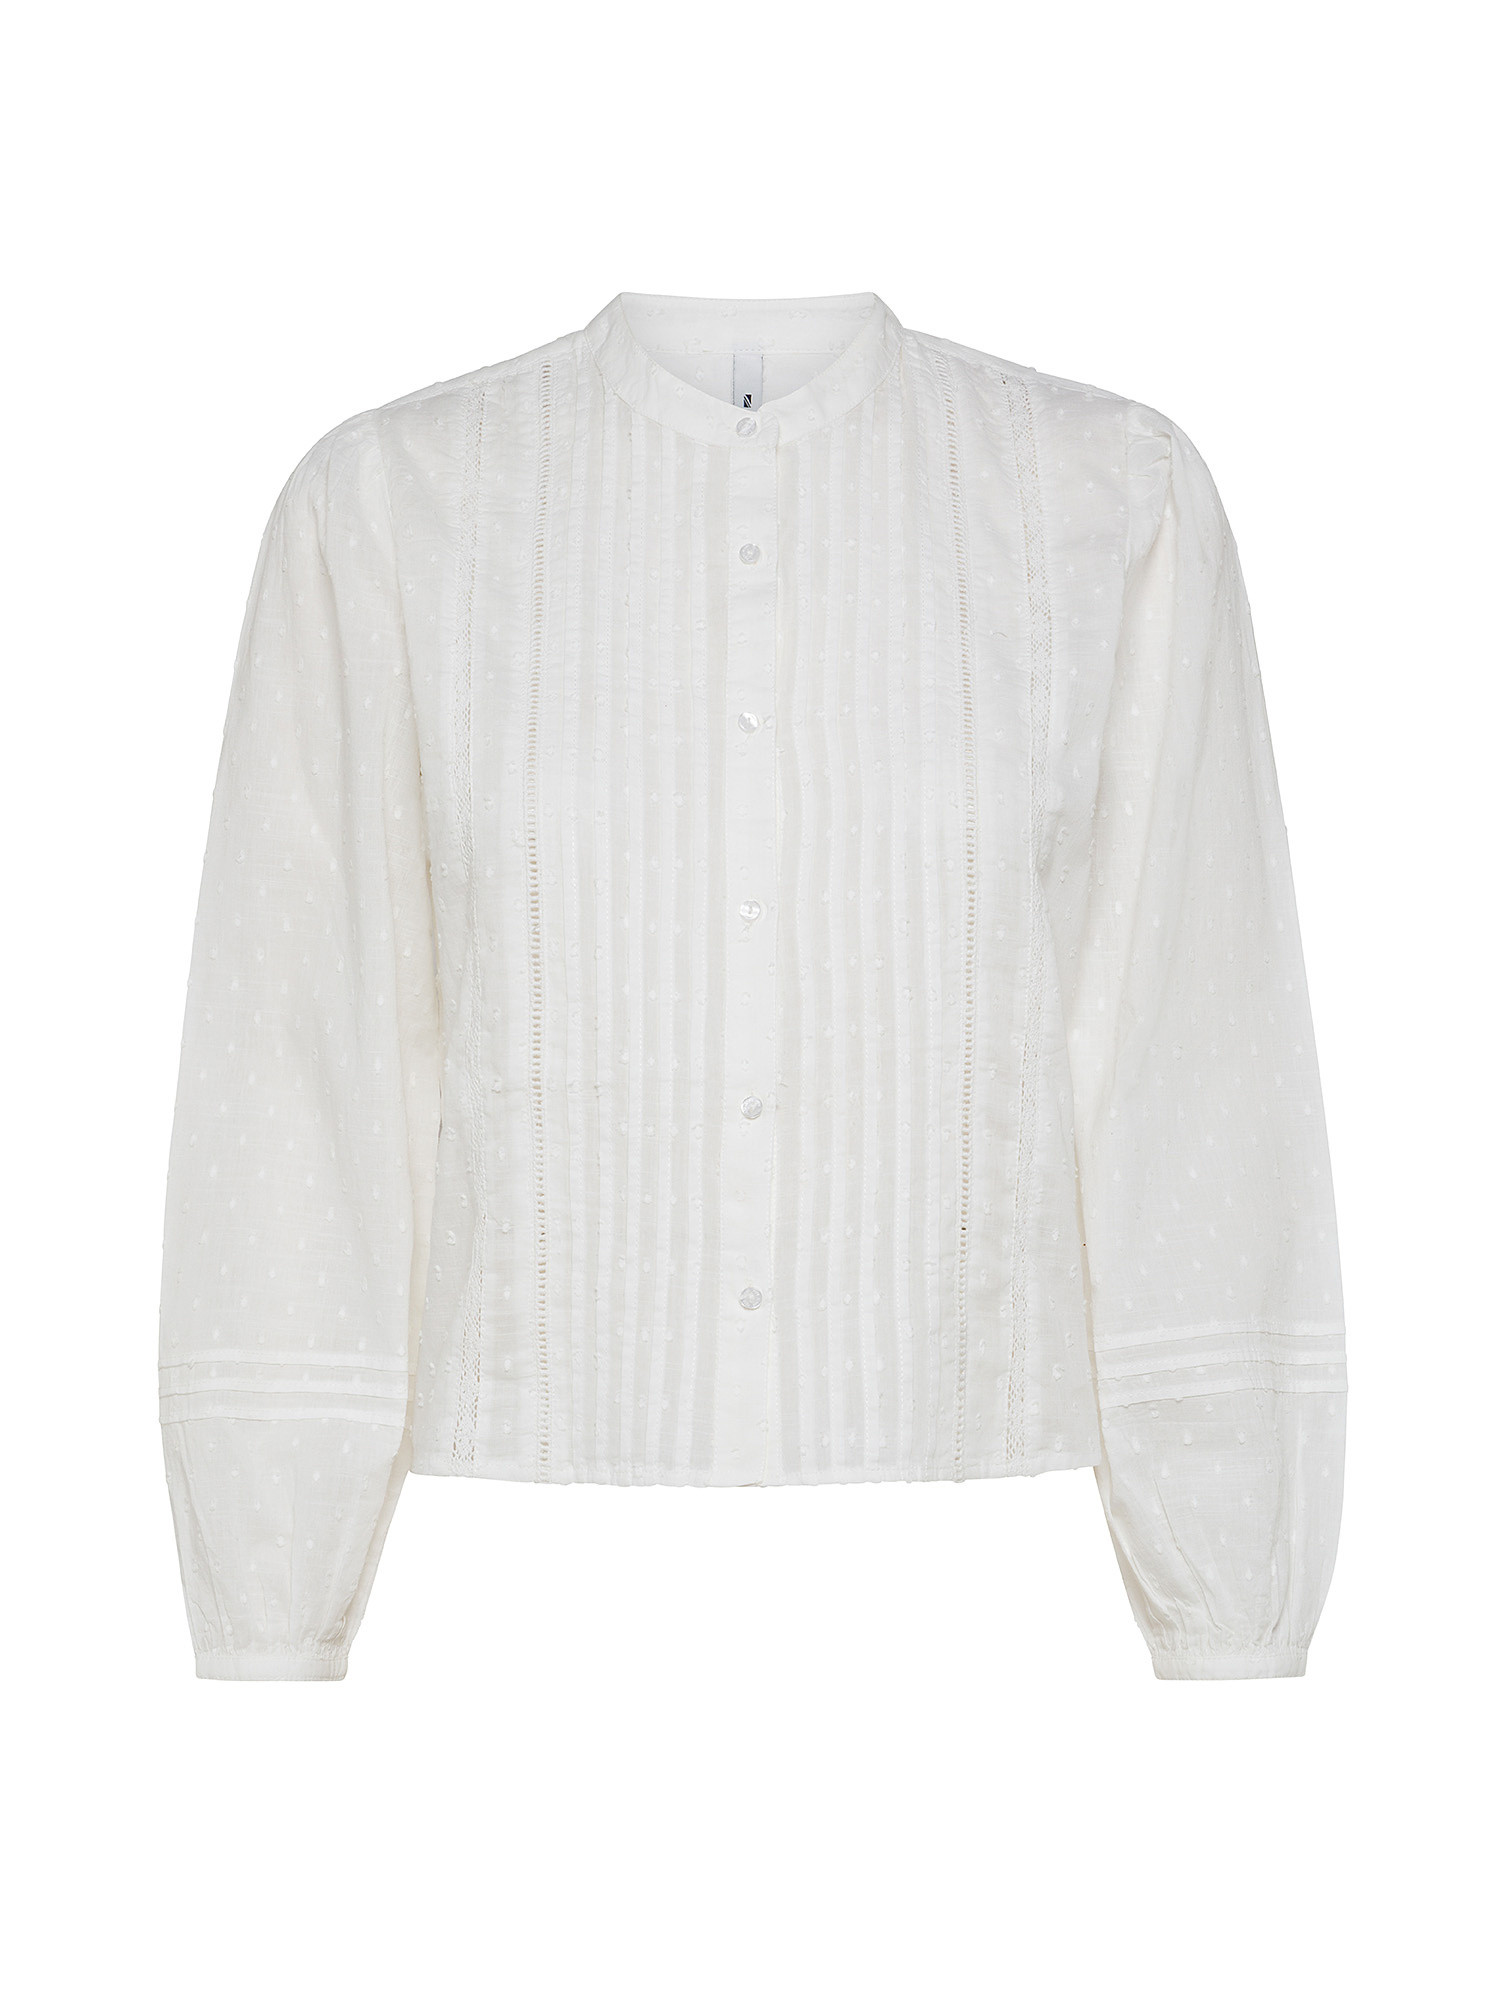 Pepe Jeans - Cotton blouse with embroidery, White, large image number 0